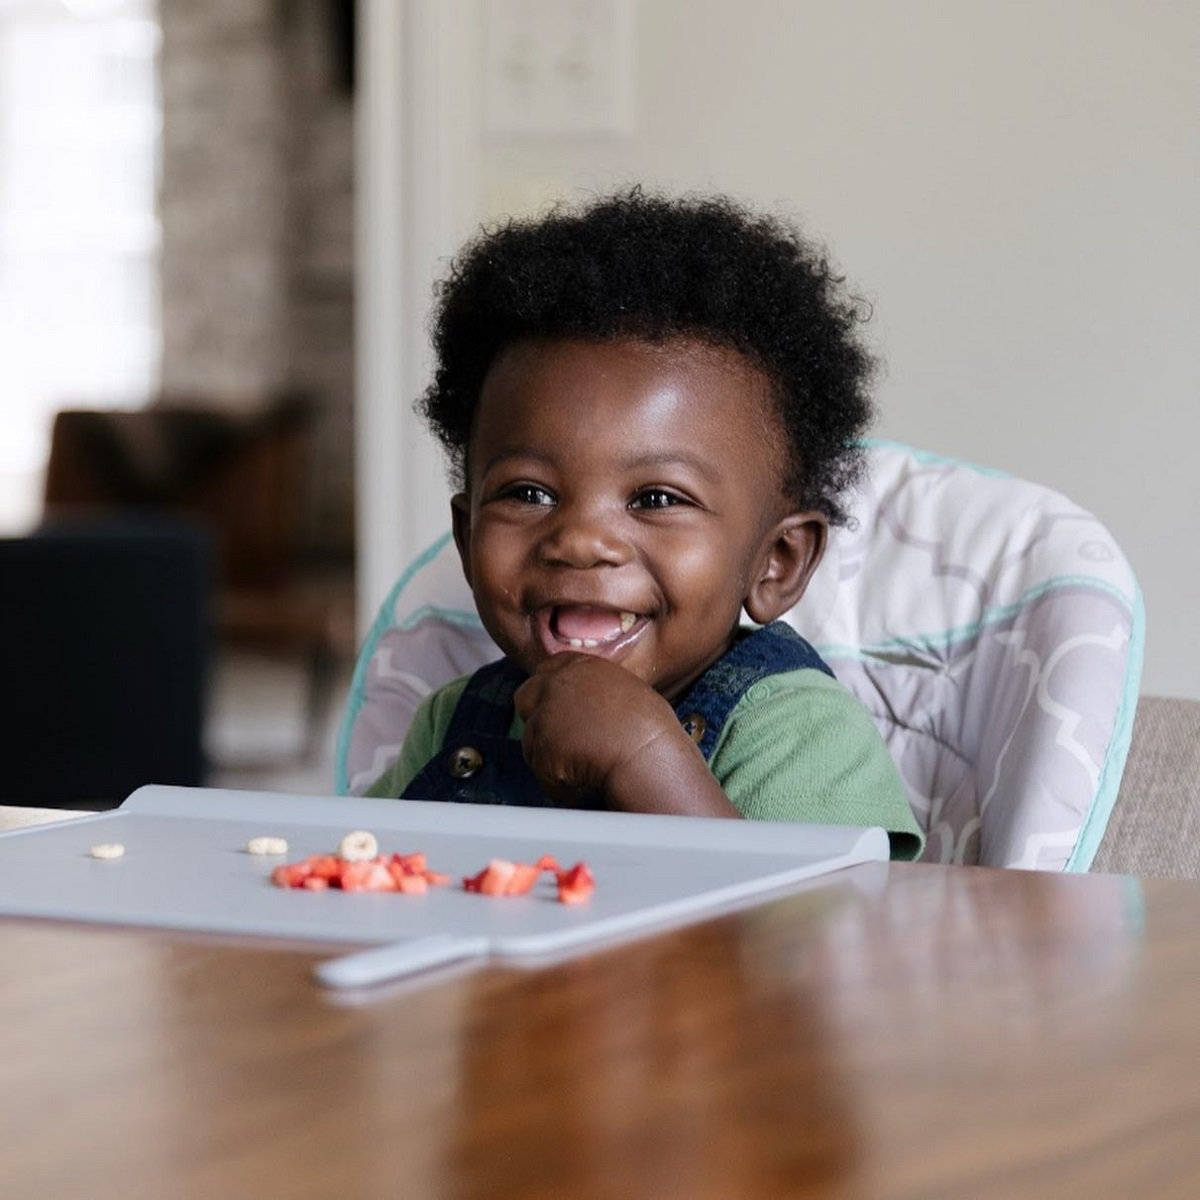 30 Thoughtful Baby Brands To Check Out For National Baby Safety Month